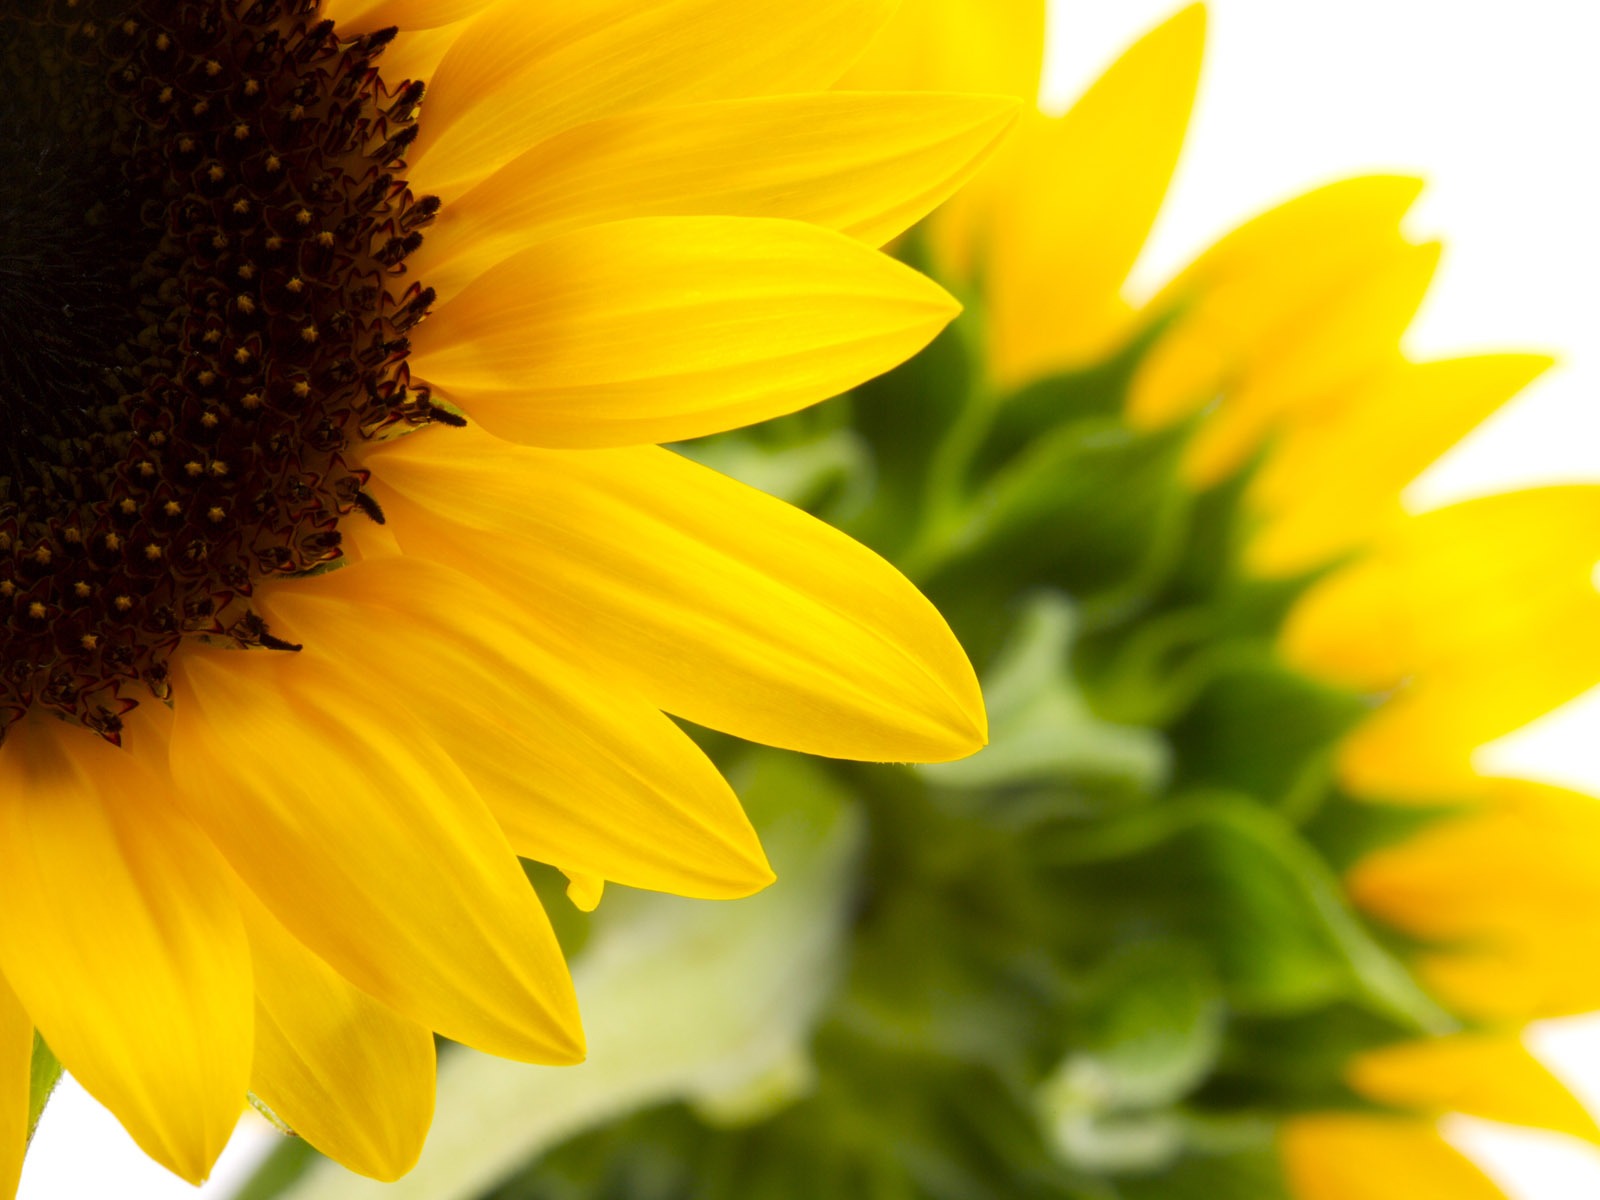 Sunny sunflower photo HD Wallpapers #26 - 1600x1200